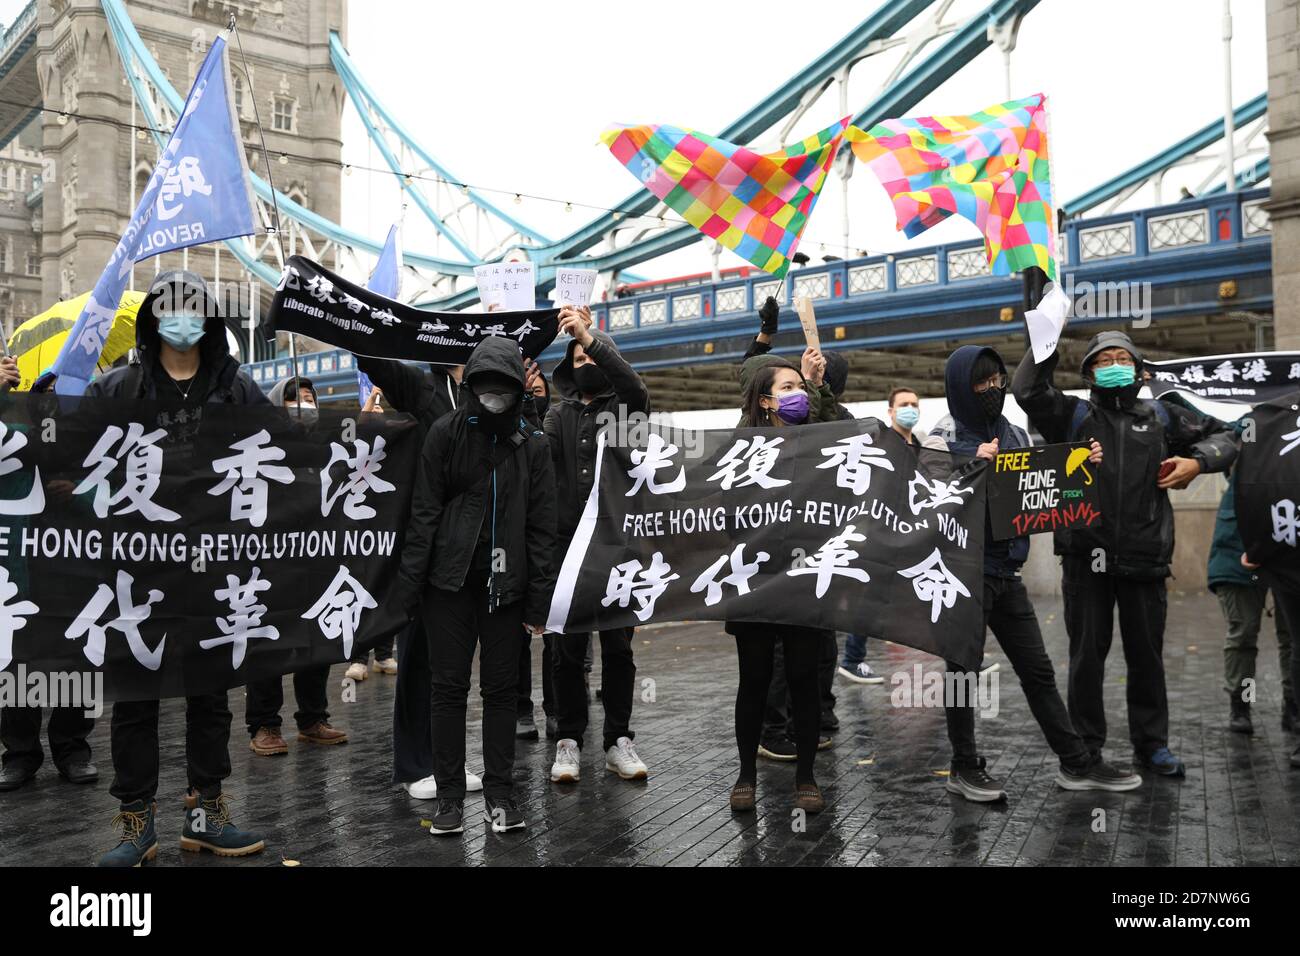 London, UK. 24th Oct, 2020. Protesters in London gathered next to Tower Bridge to show solidarity with 12 Hong Kongers who are currently being detained in mainland China accused of attempting to flee Hong Kong for Taiwan. Credit: David Coulson/Alamy Live News Stock Photo